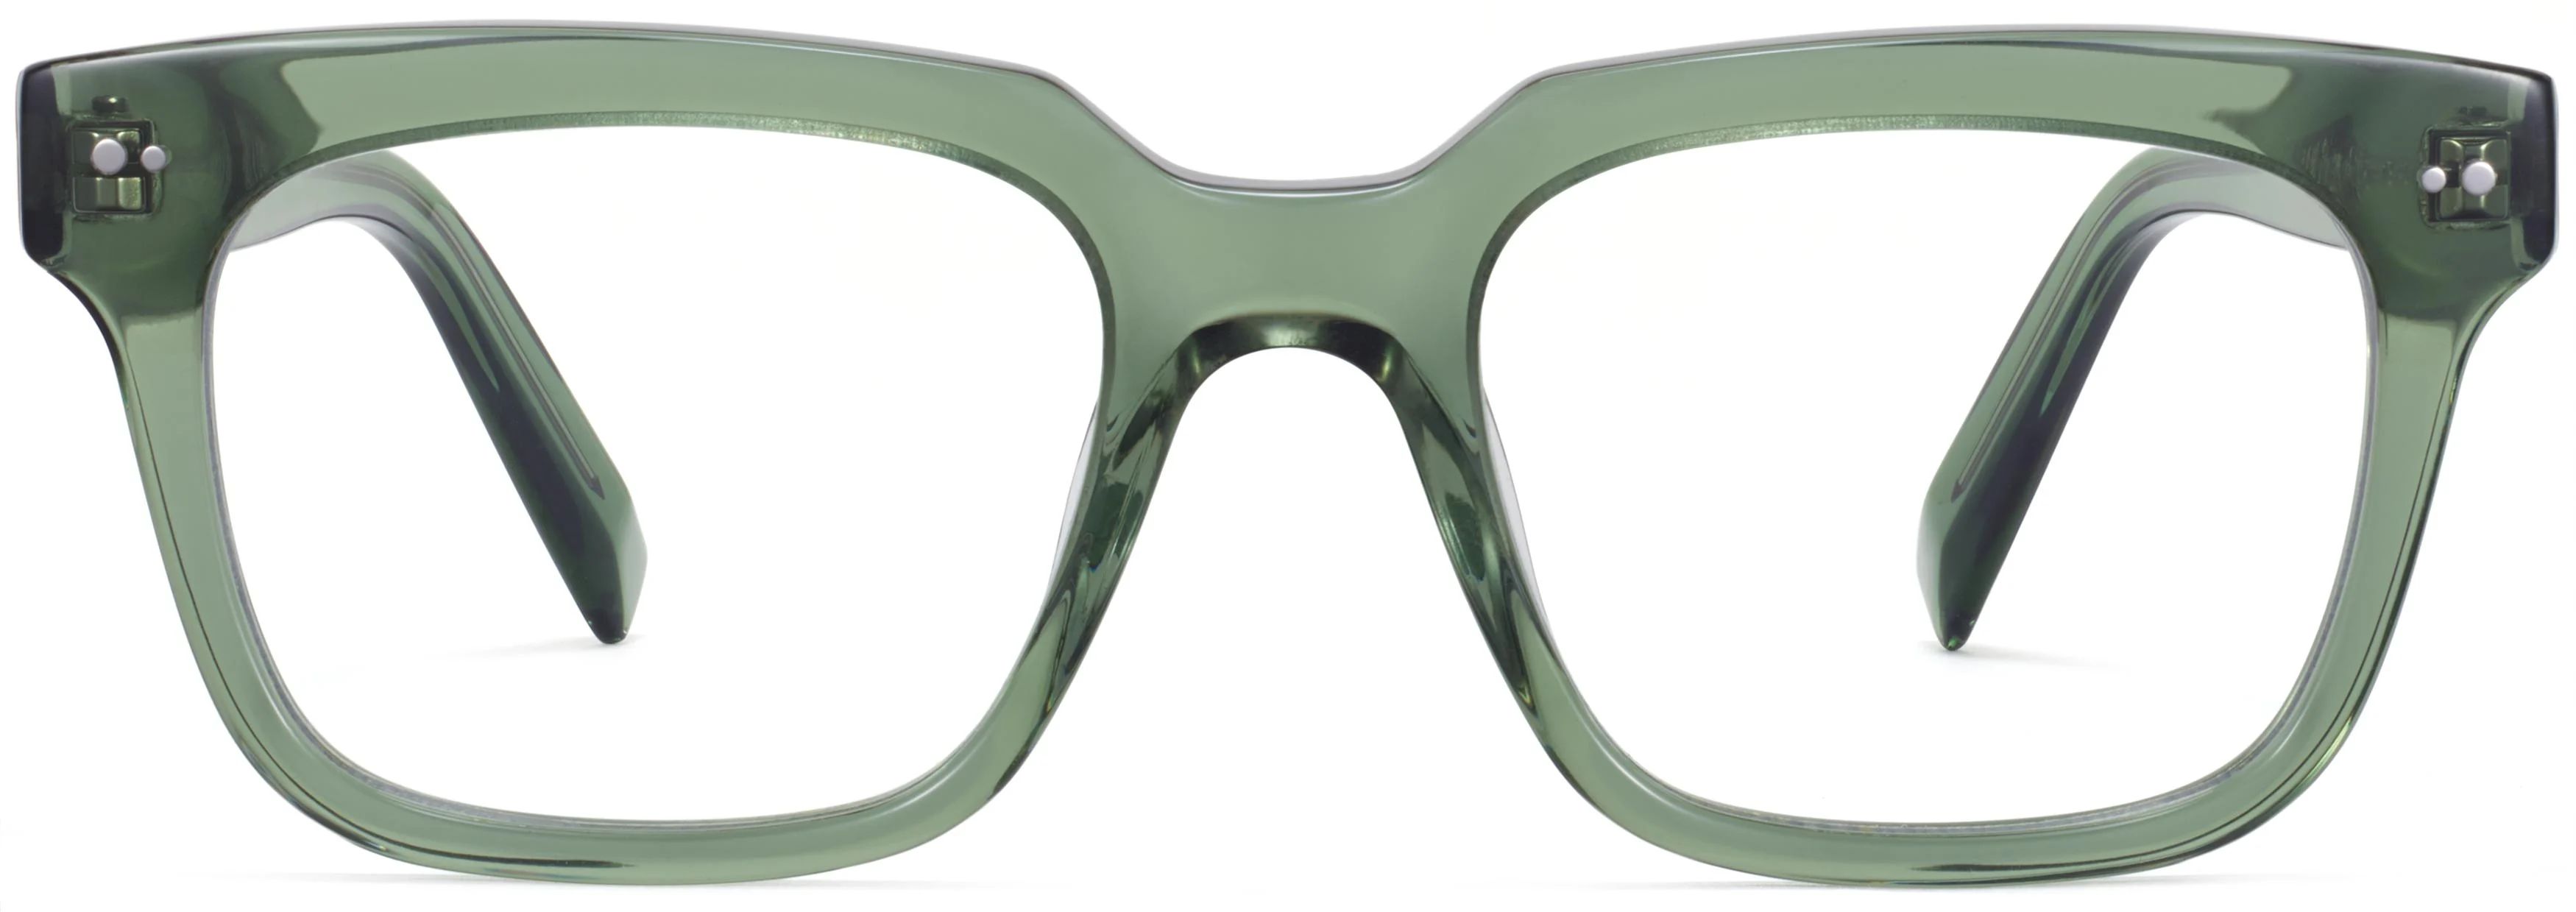 Winston Eyeglasses in Rosemary Crystal | Warby Parker | Warby Parker (US)